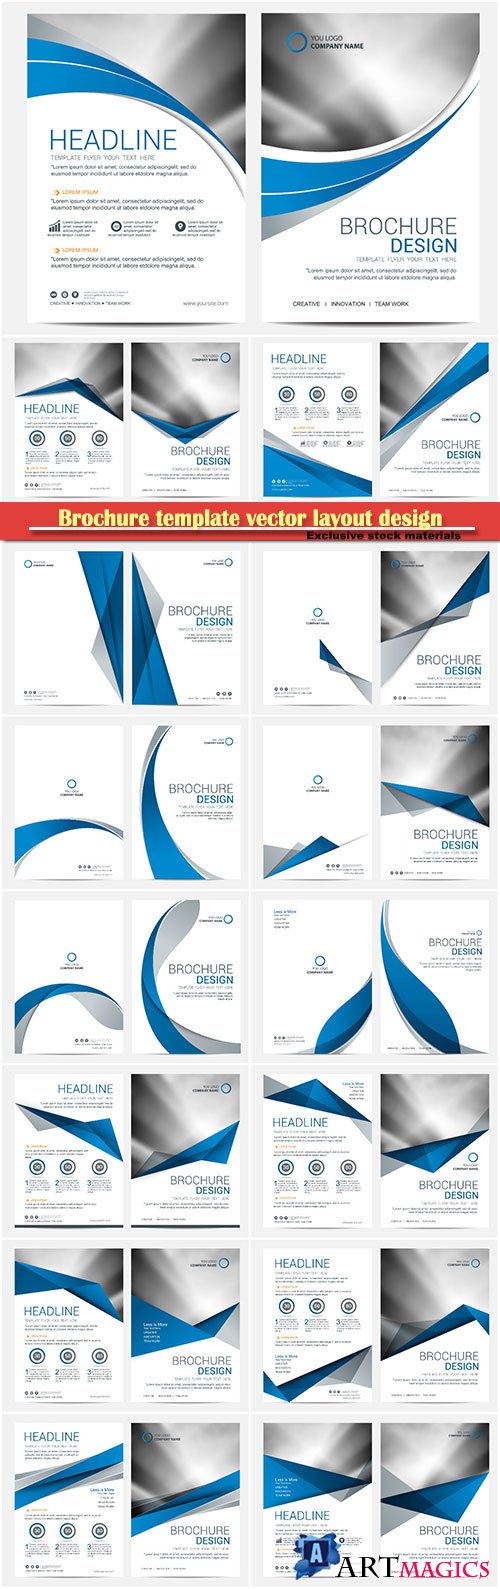 Brochure template vector layout design, corporate business annual report, magazine, flyer mockup # 152